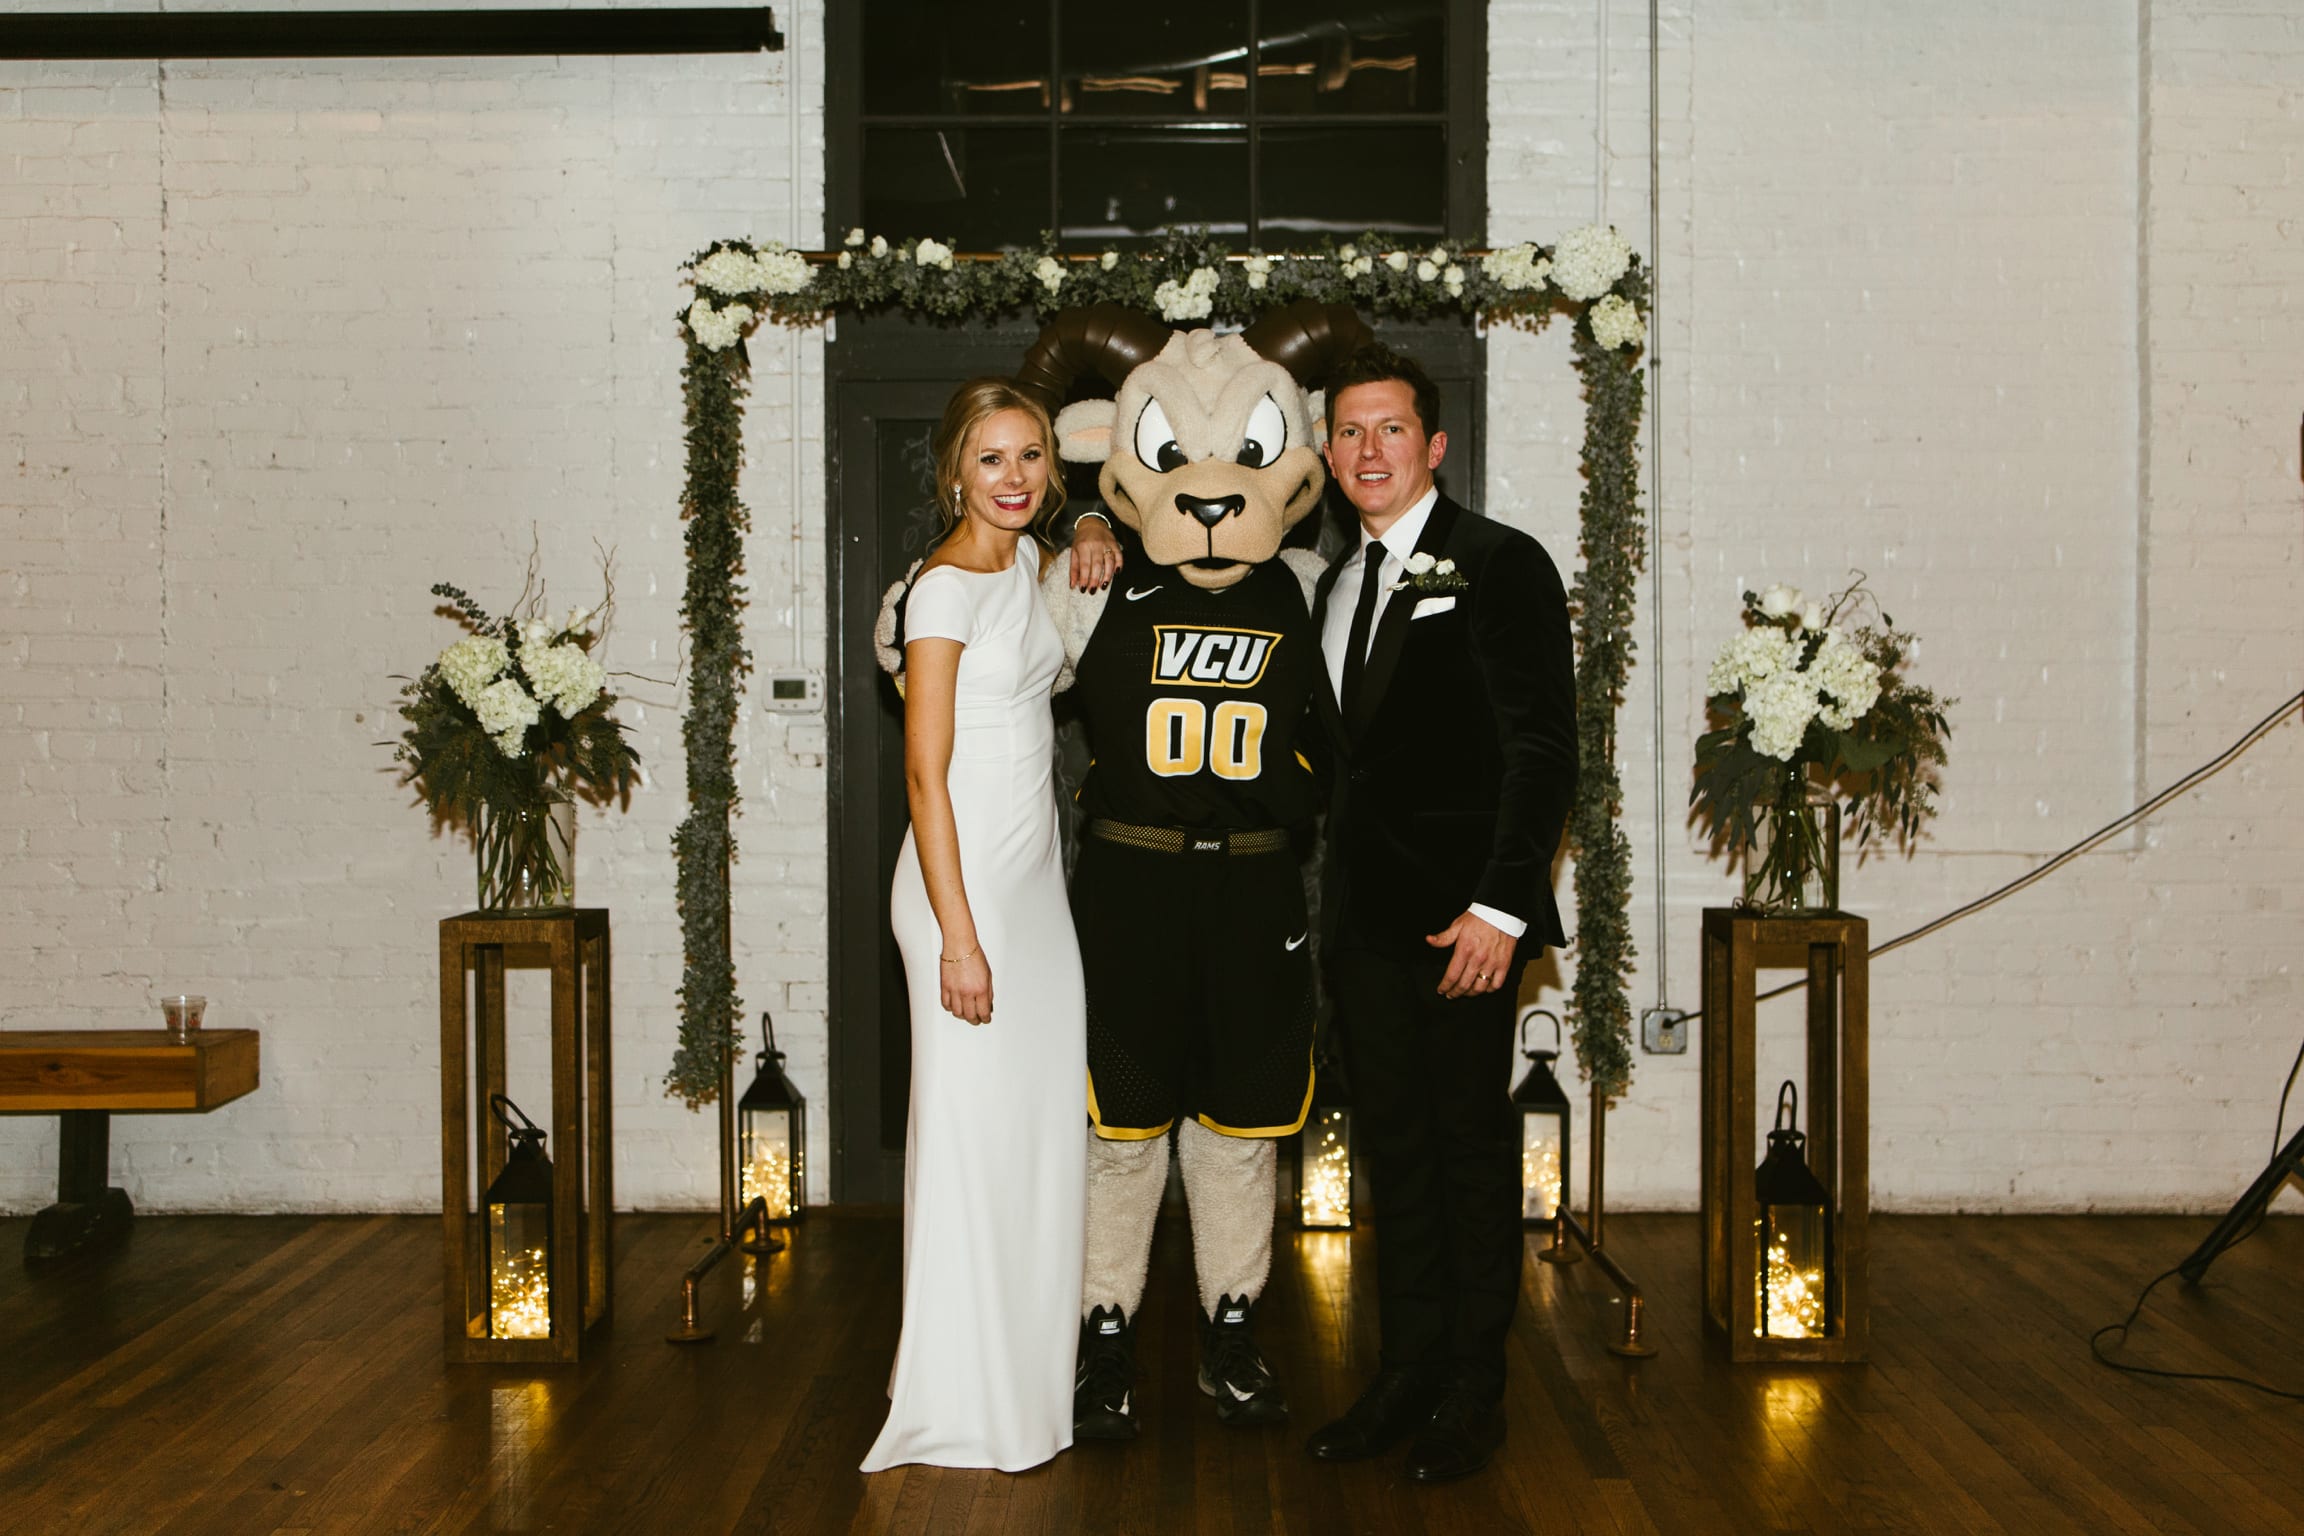 Danielle Hiser and her husband pose with V-C-U mascot Rodney the Ram at their wedding.